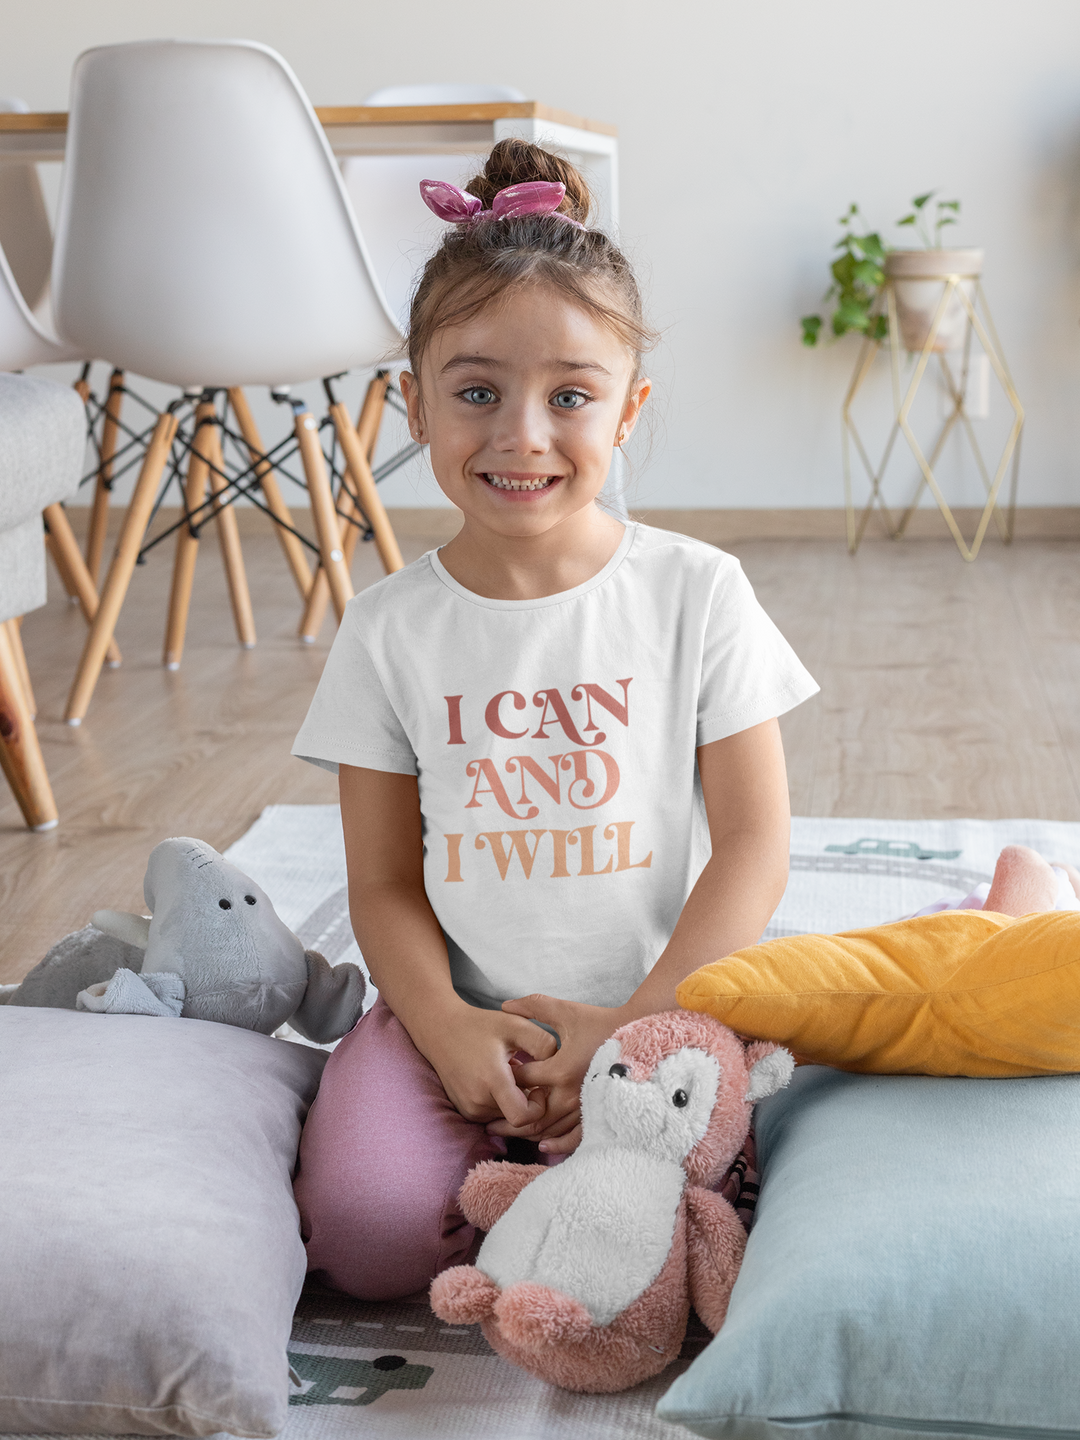 I Can And I Will. Short Sleeve T Shirt For Toddler And Kids. - TeesForToddlersandKids -  t-shirt - positive - i-can-and-i-will-short-sleeve-t-shirt-for-toddler-and-kids